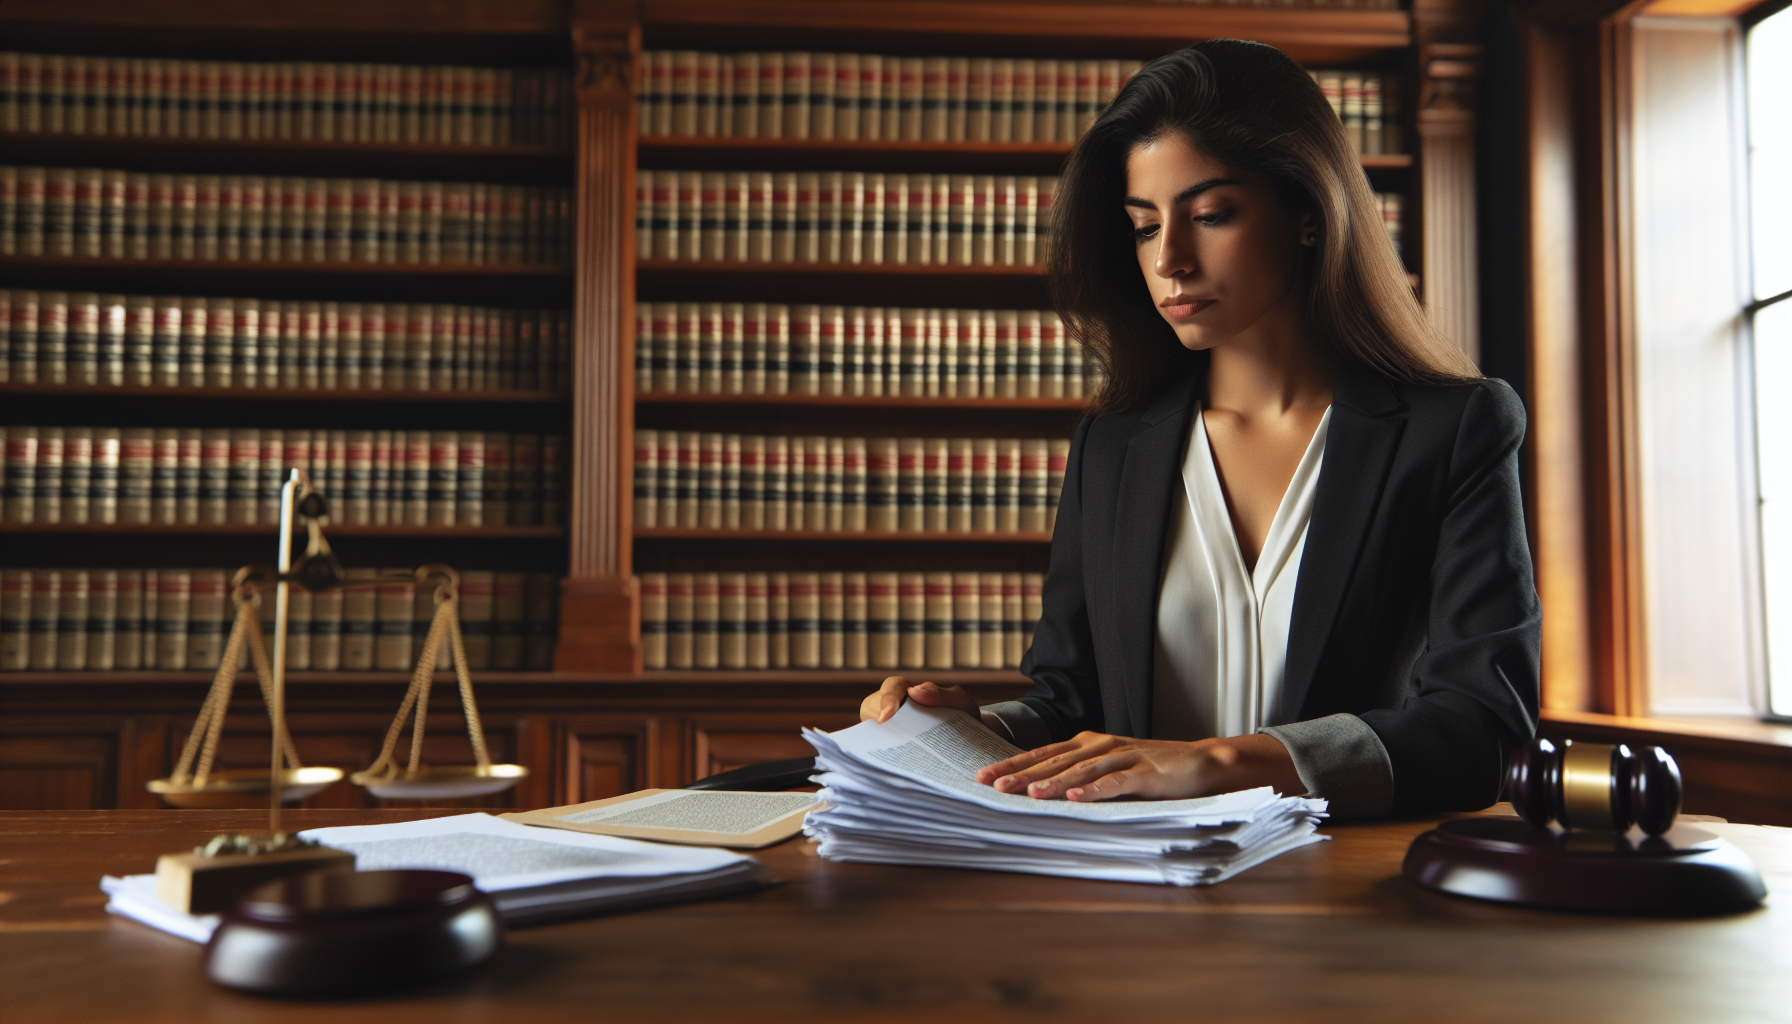 Illustration of attorney reviewing legal documents